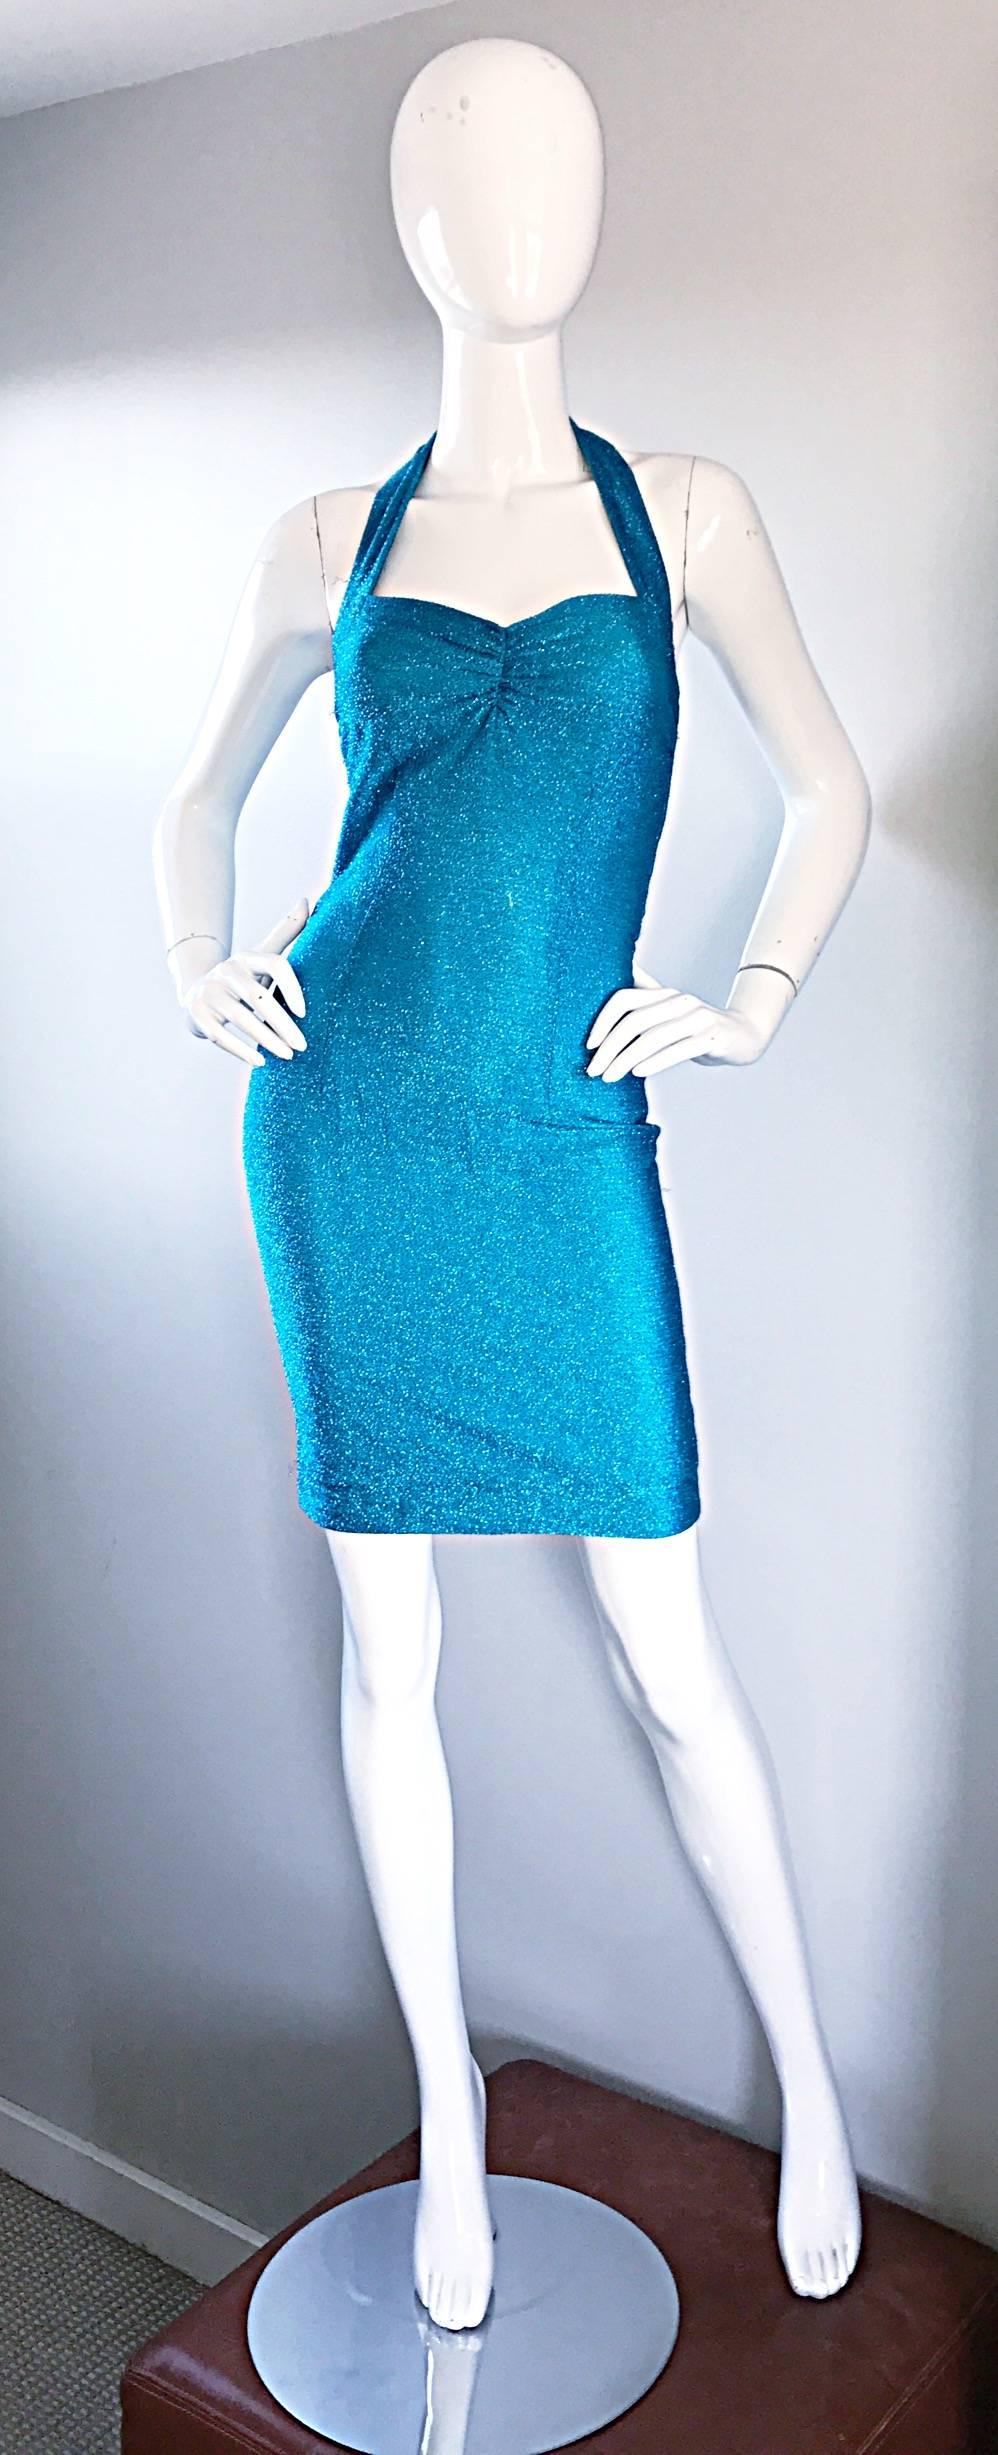 Sexy vintage 90s bright blue metallic Lurex Bodycon halter mini dress! Hugs the body in all the right places, with lots of attention to detail. Rushing at center bust. Bodice has a boned bodice to hold everything in place. Metal zipper up the back